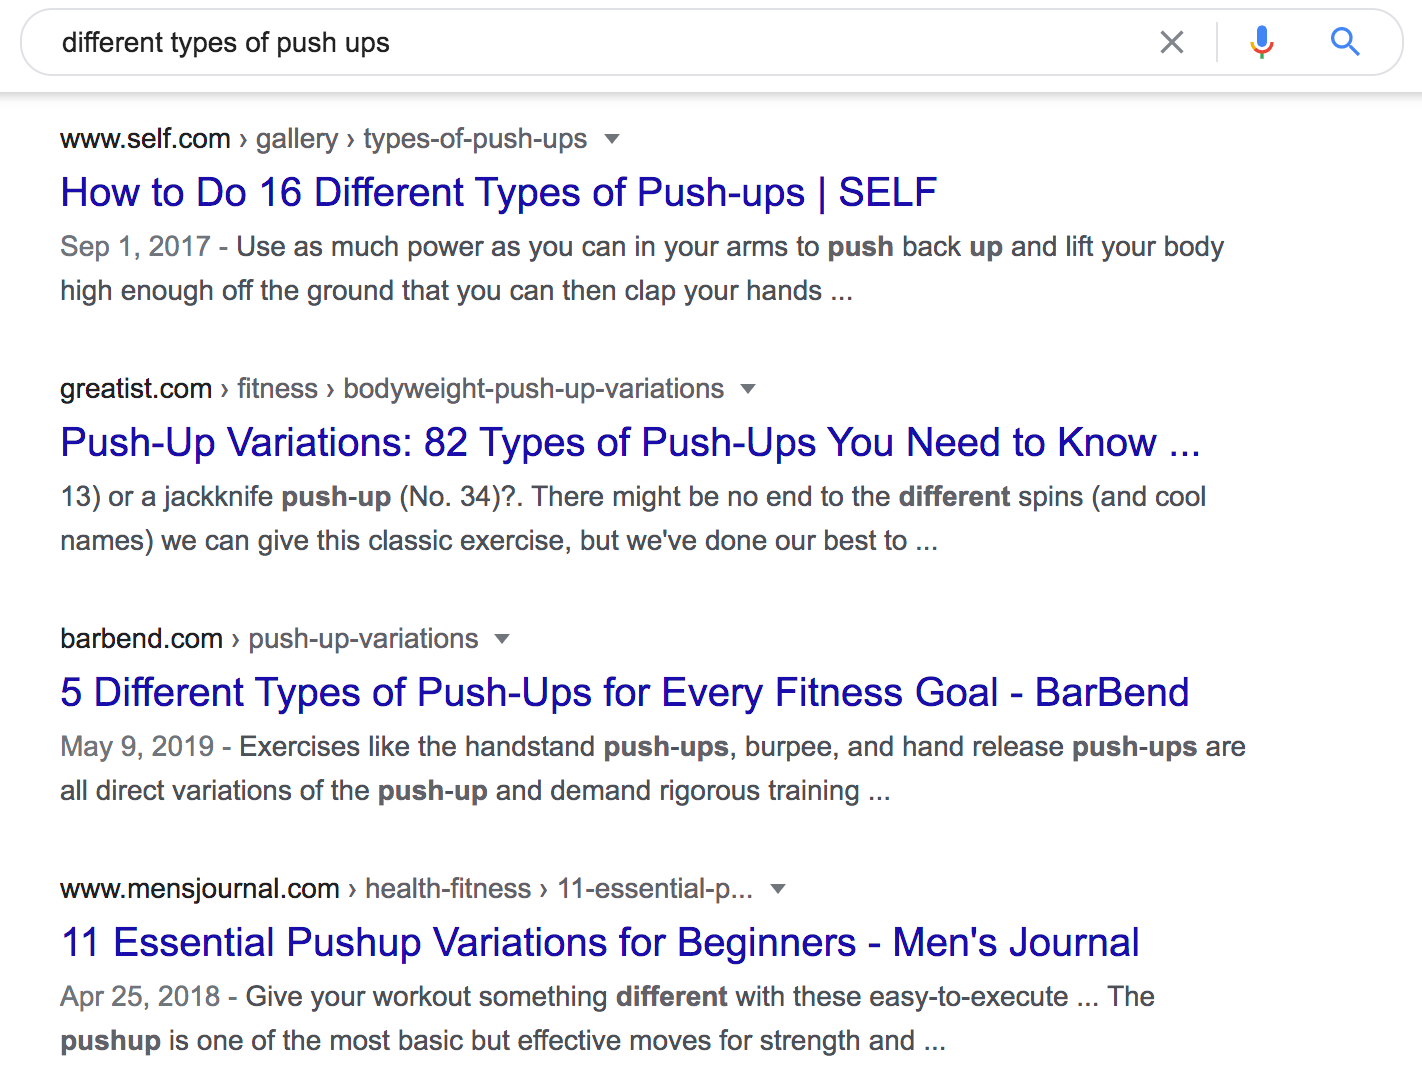 Google search result of "different types of push up"